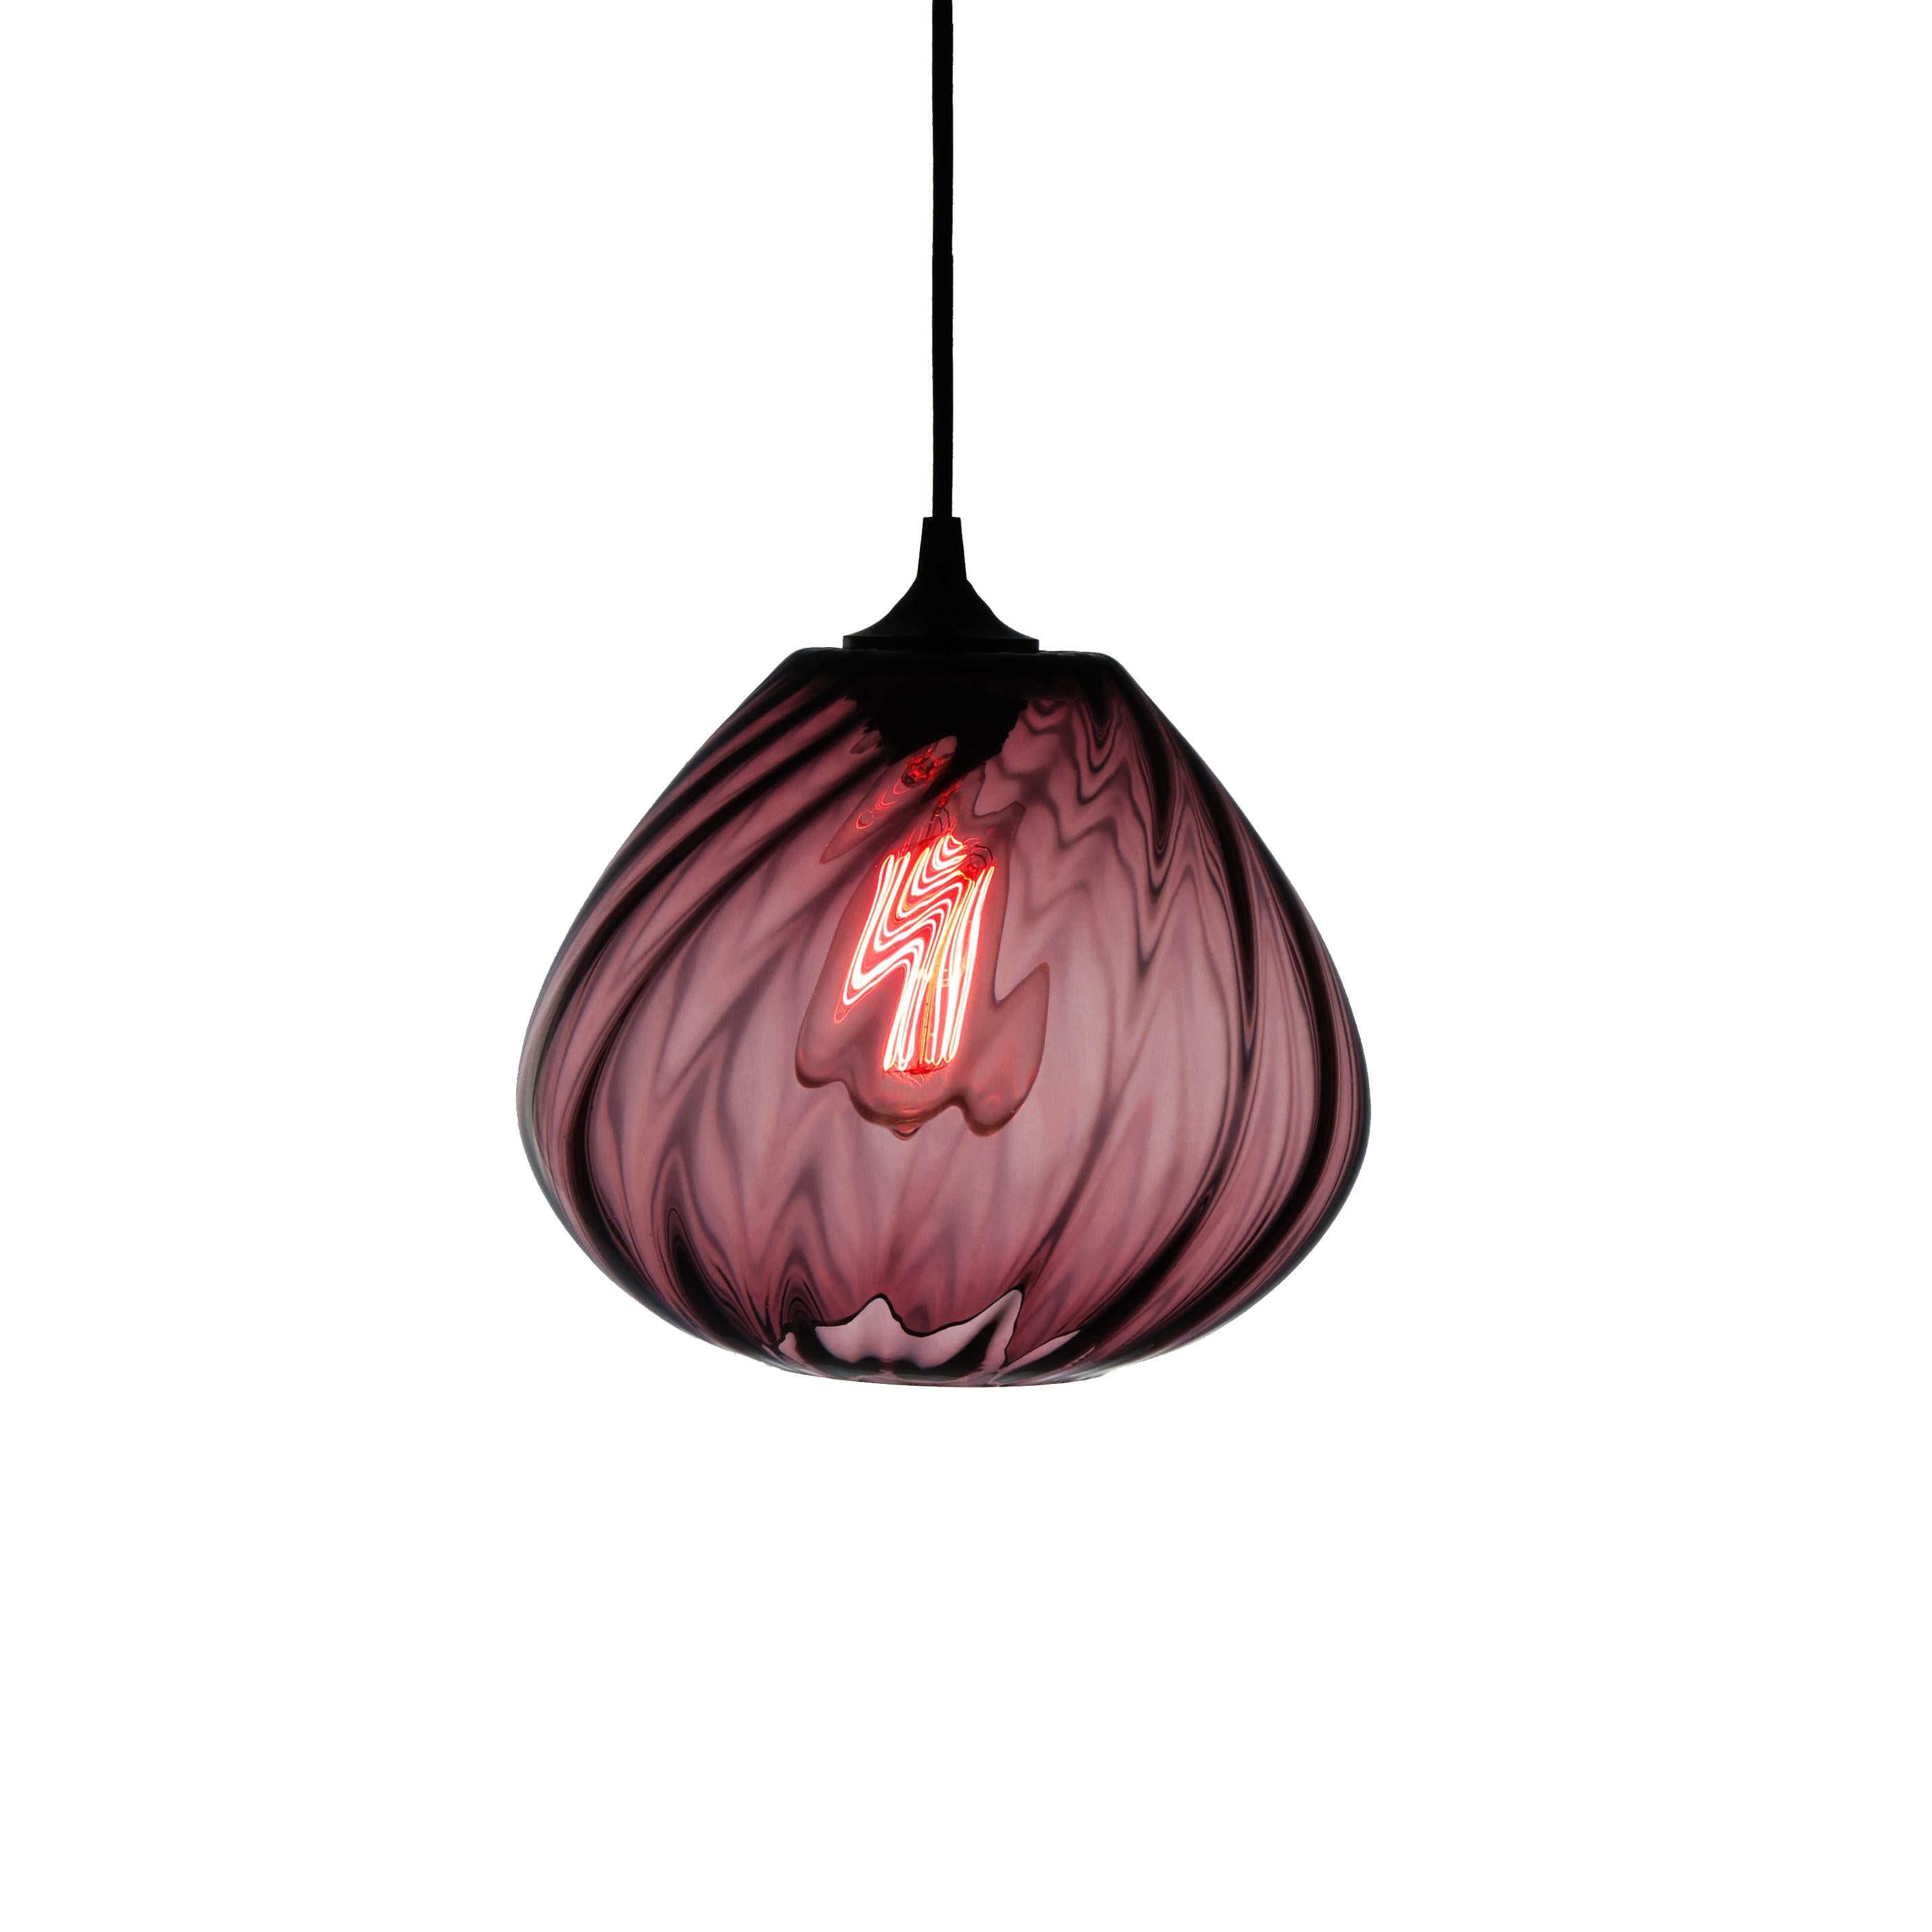 Contemporary Transparent Hand Blown Glass Architectural Pendant Lamp with Optical Effect For Sale